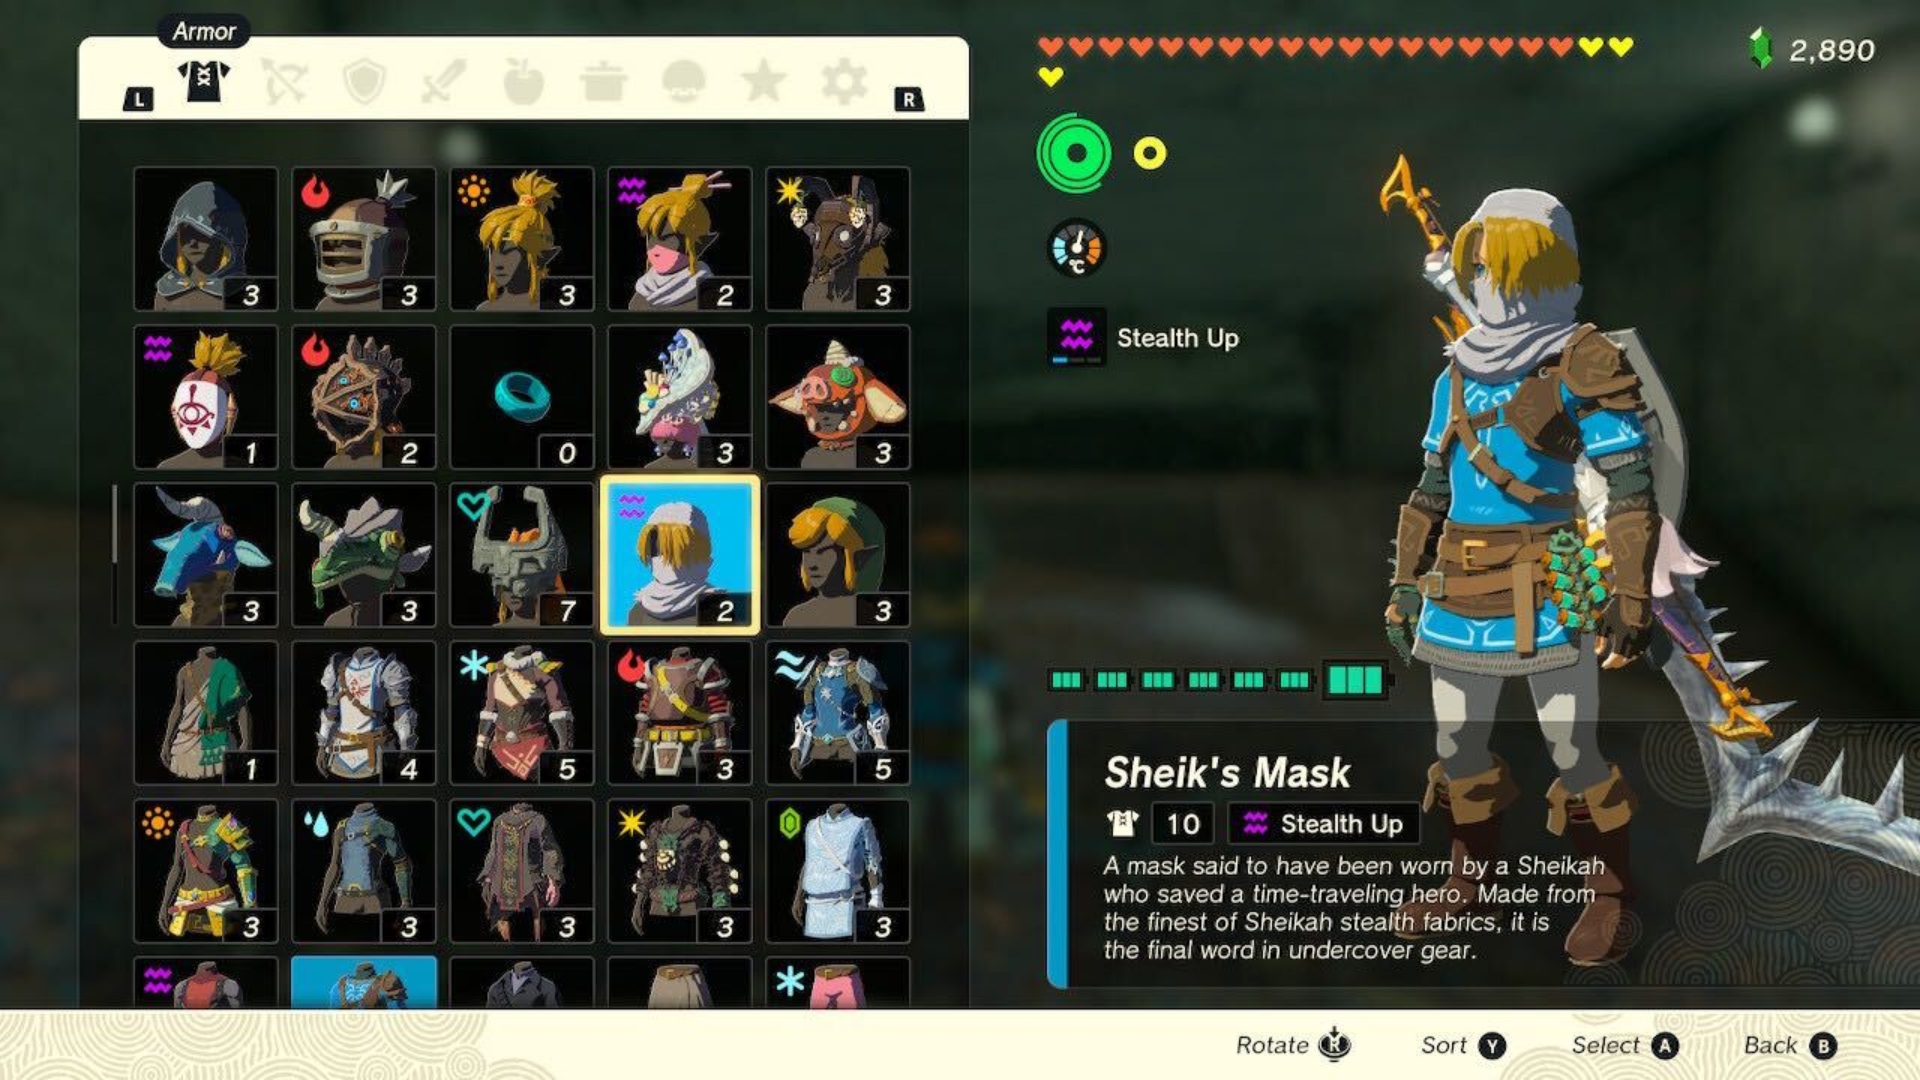 The Sheik's Mask reward for completing the Desert Coliseum in Tears of the Kingdom.